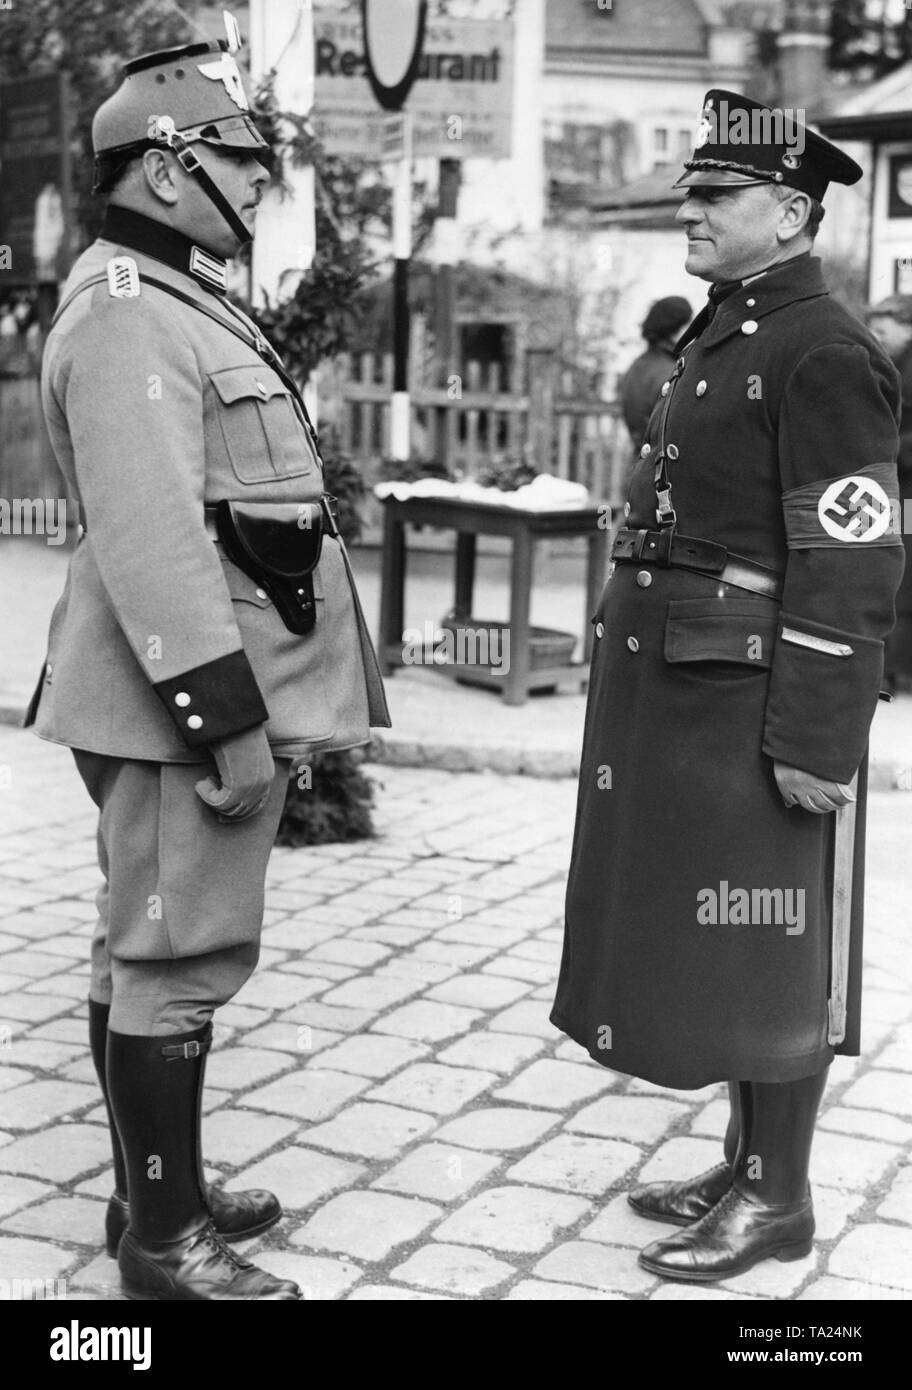 After the annexation of Austria to the German Reich the Austrian police gets new uniforms. On the right is the old uniform of the Viennese police and on the left the new uniform. Stock Photo